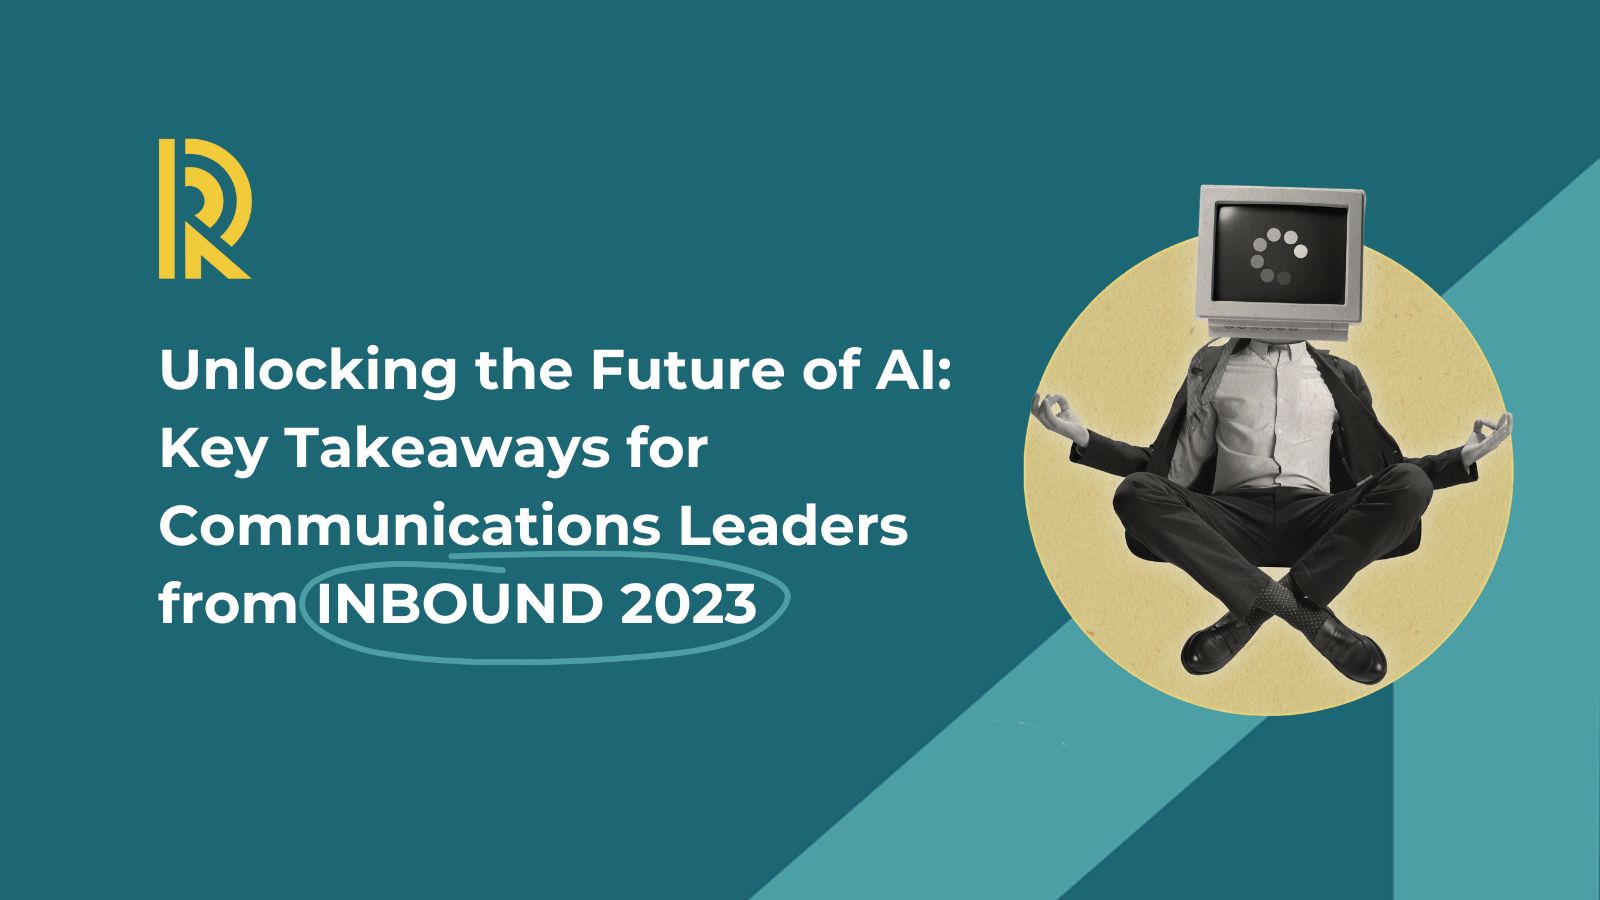 Unlocking the Future of AI: Key Takeaways for Communications Leaders from INBOUND 2023